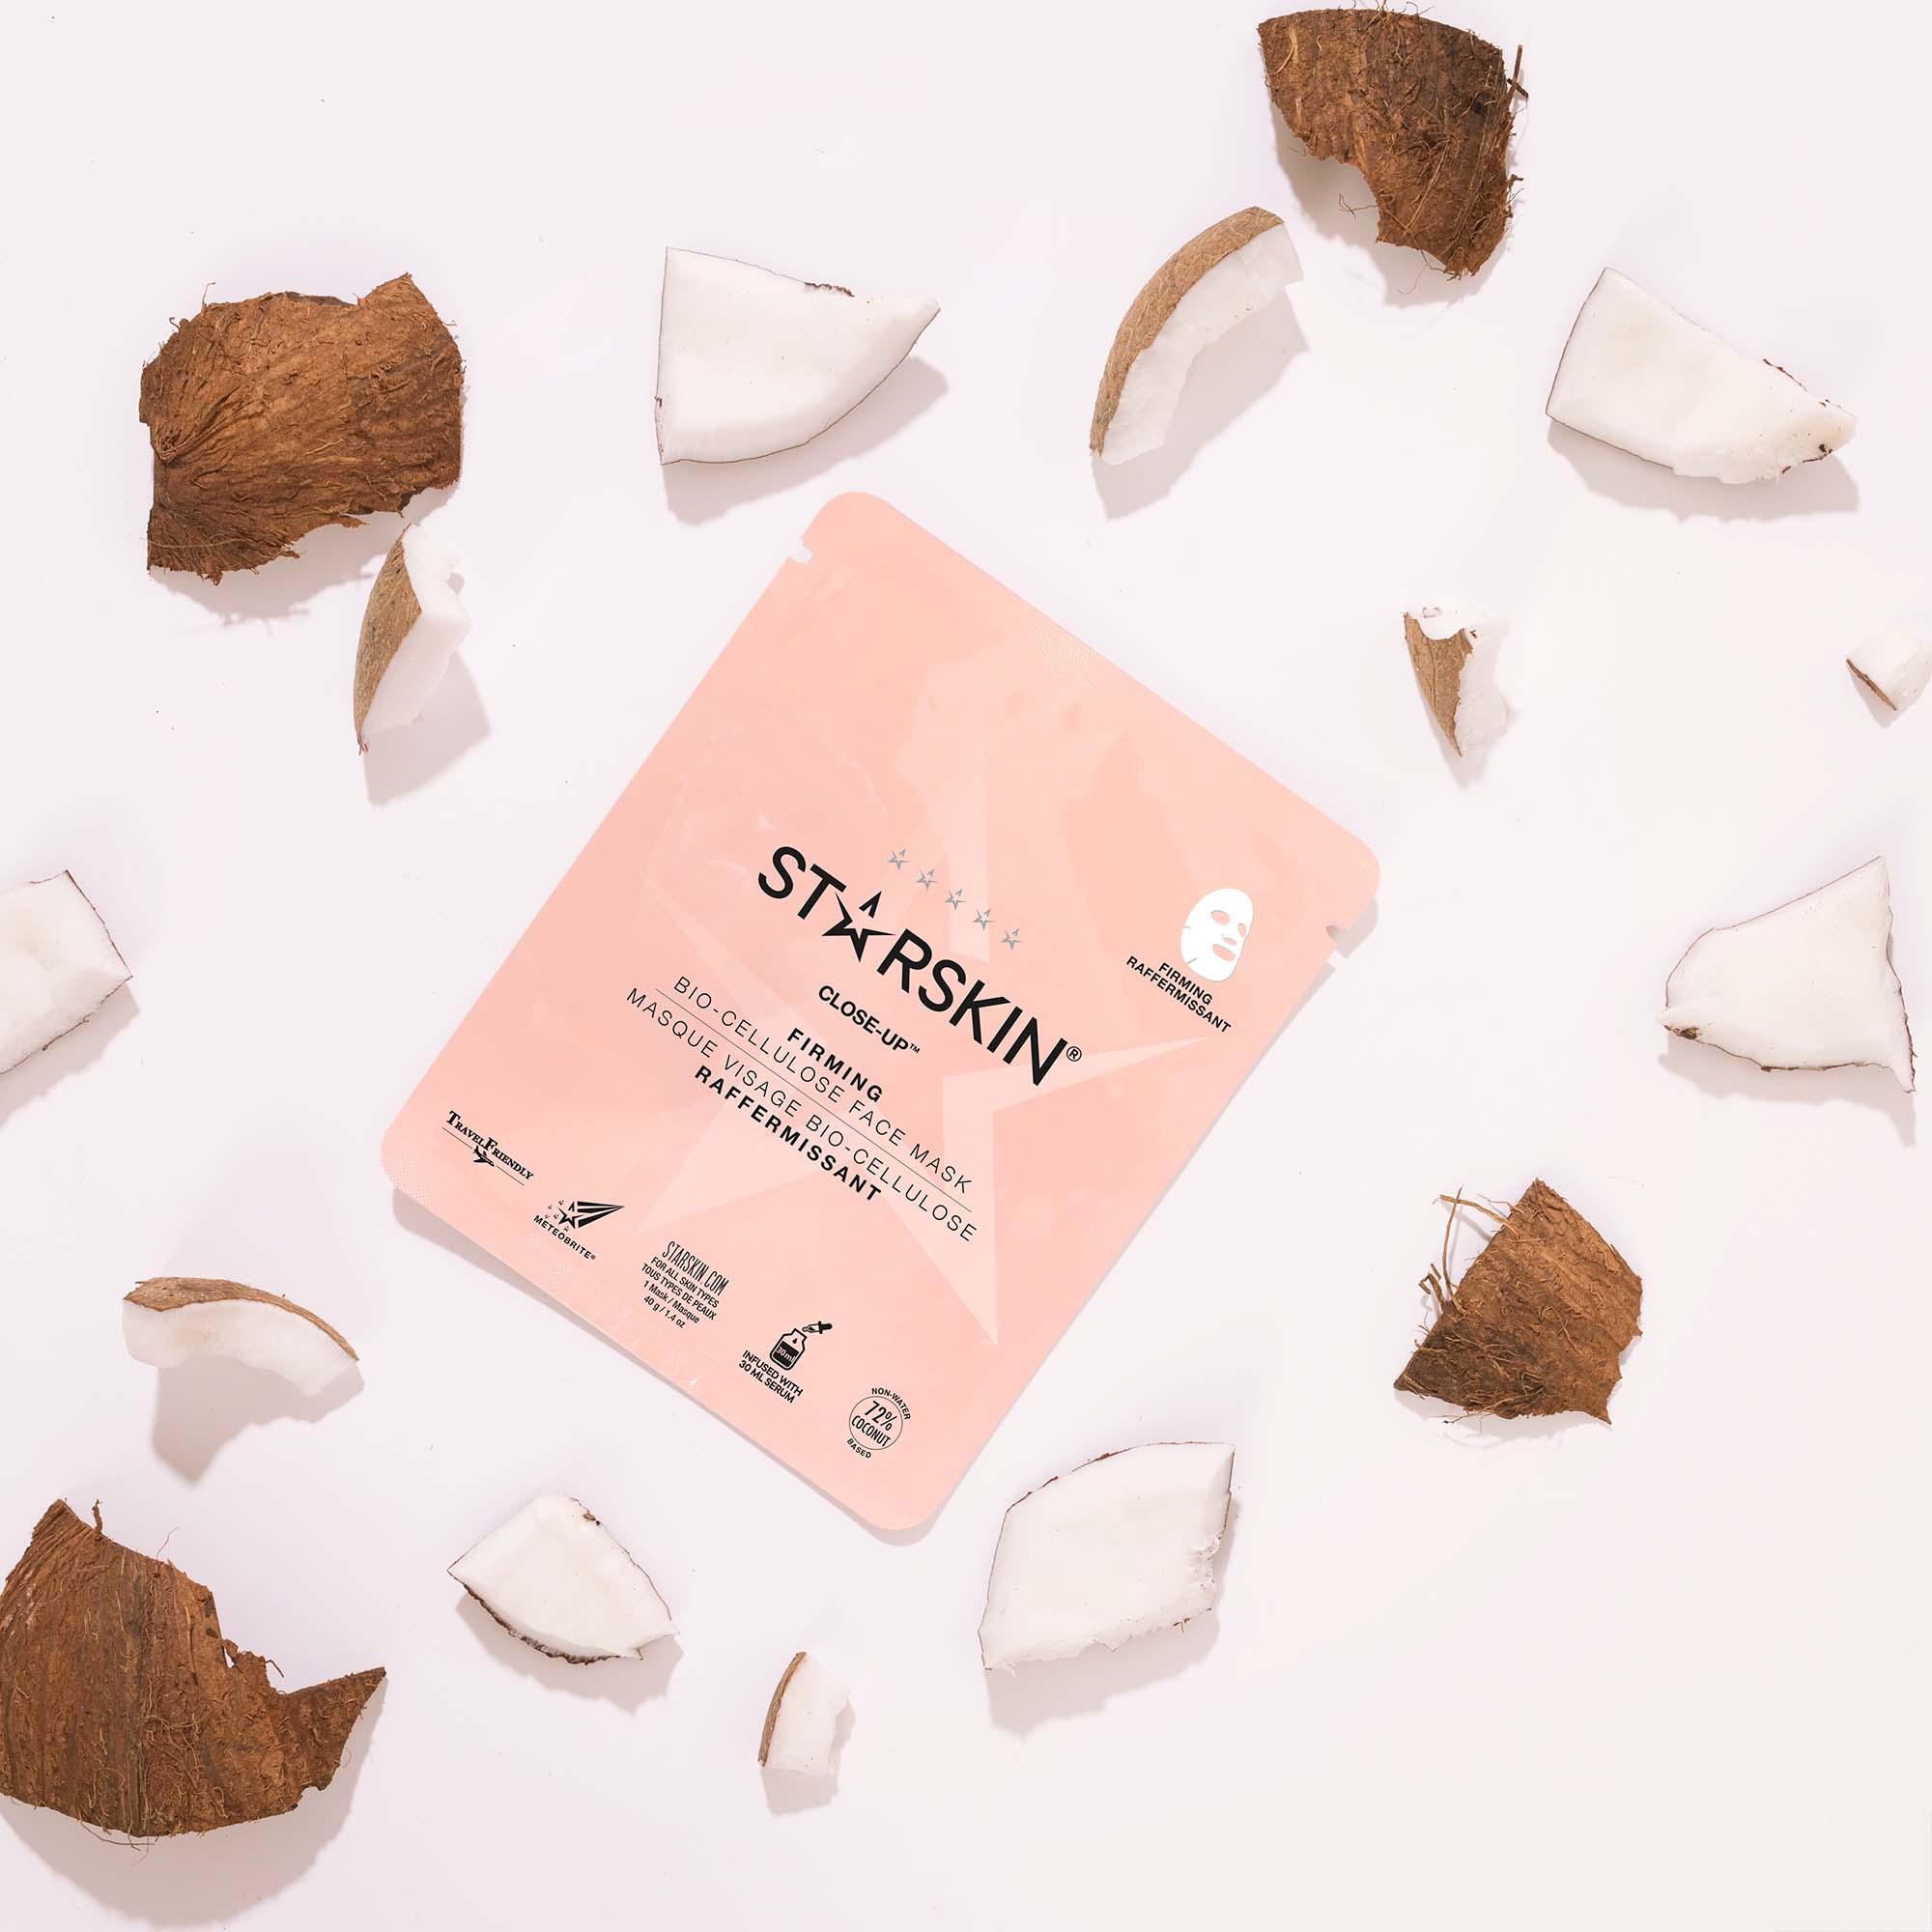 Inside packaging of the close up face sheet mask, surrounded by broken coconut pieces